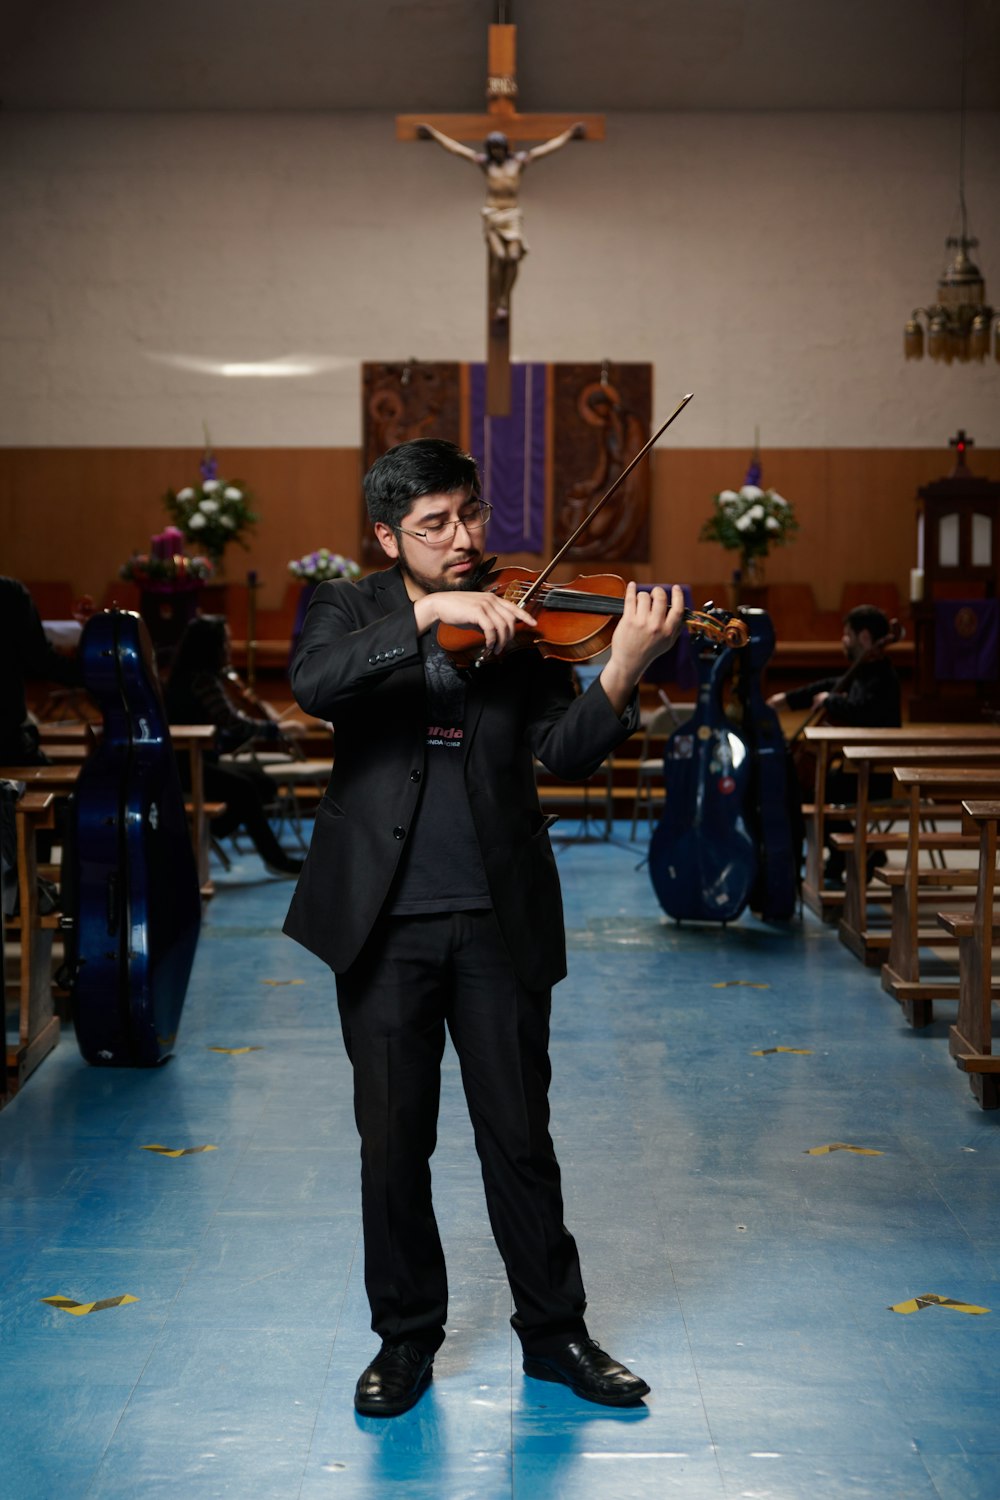 a man in a suit playing a violin